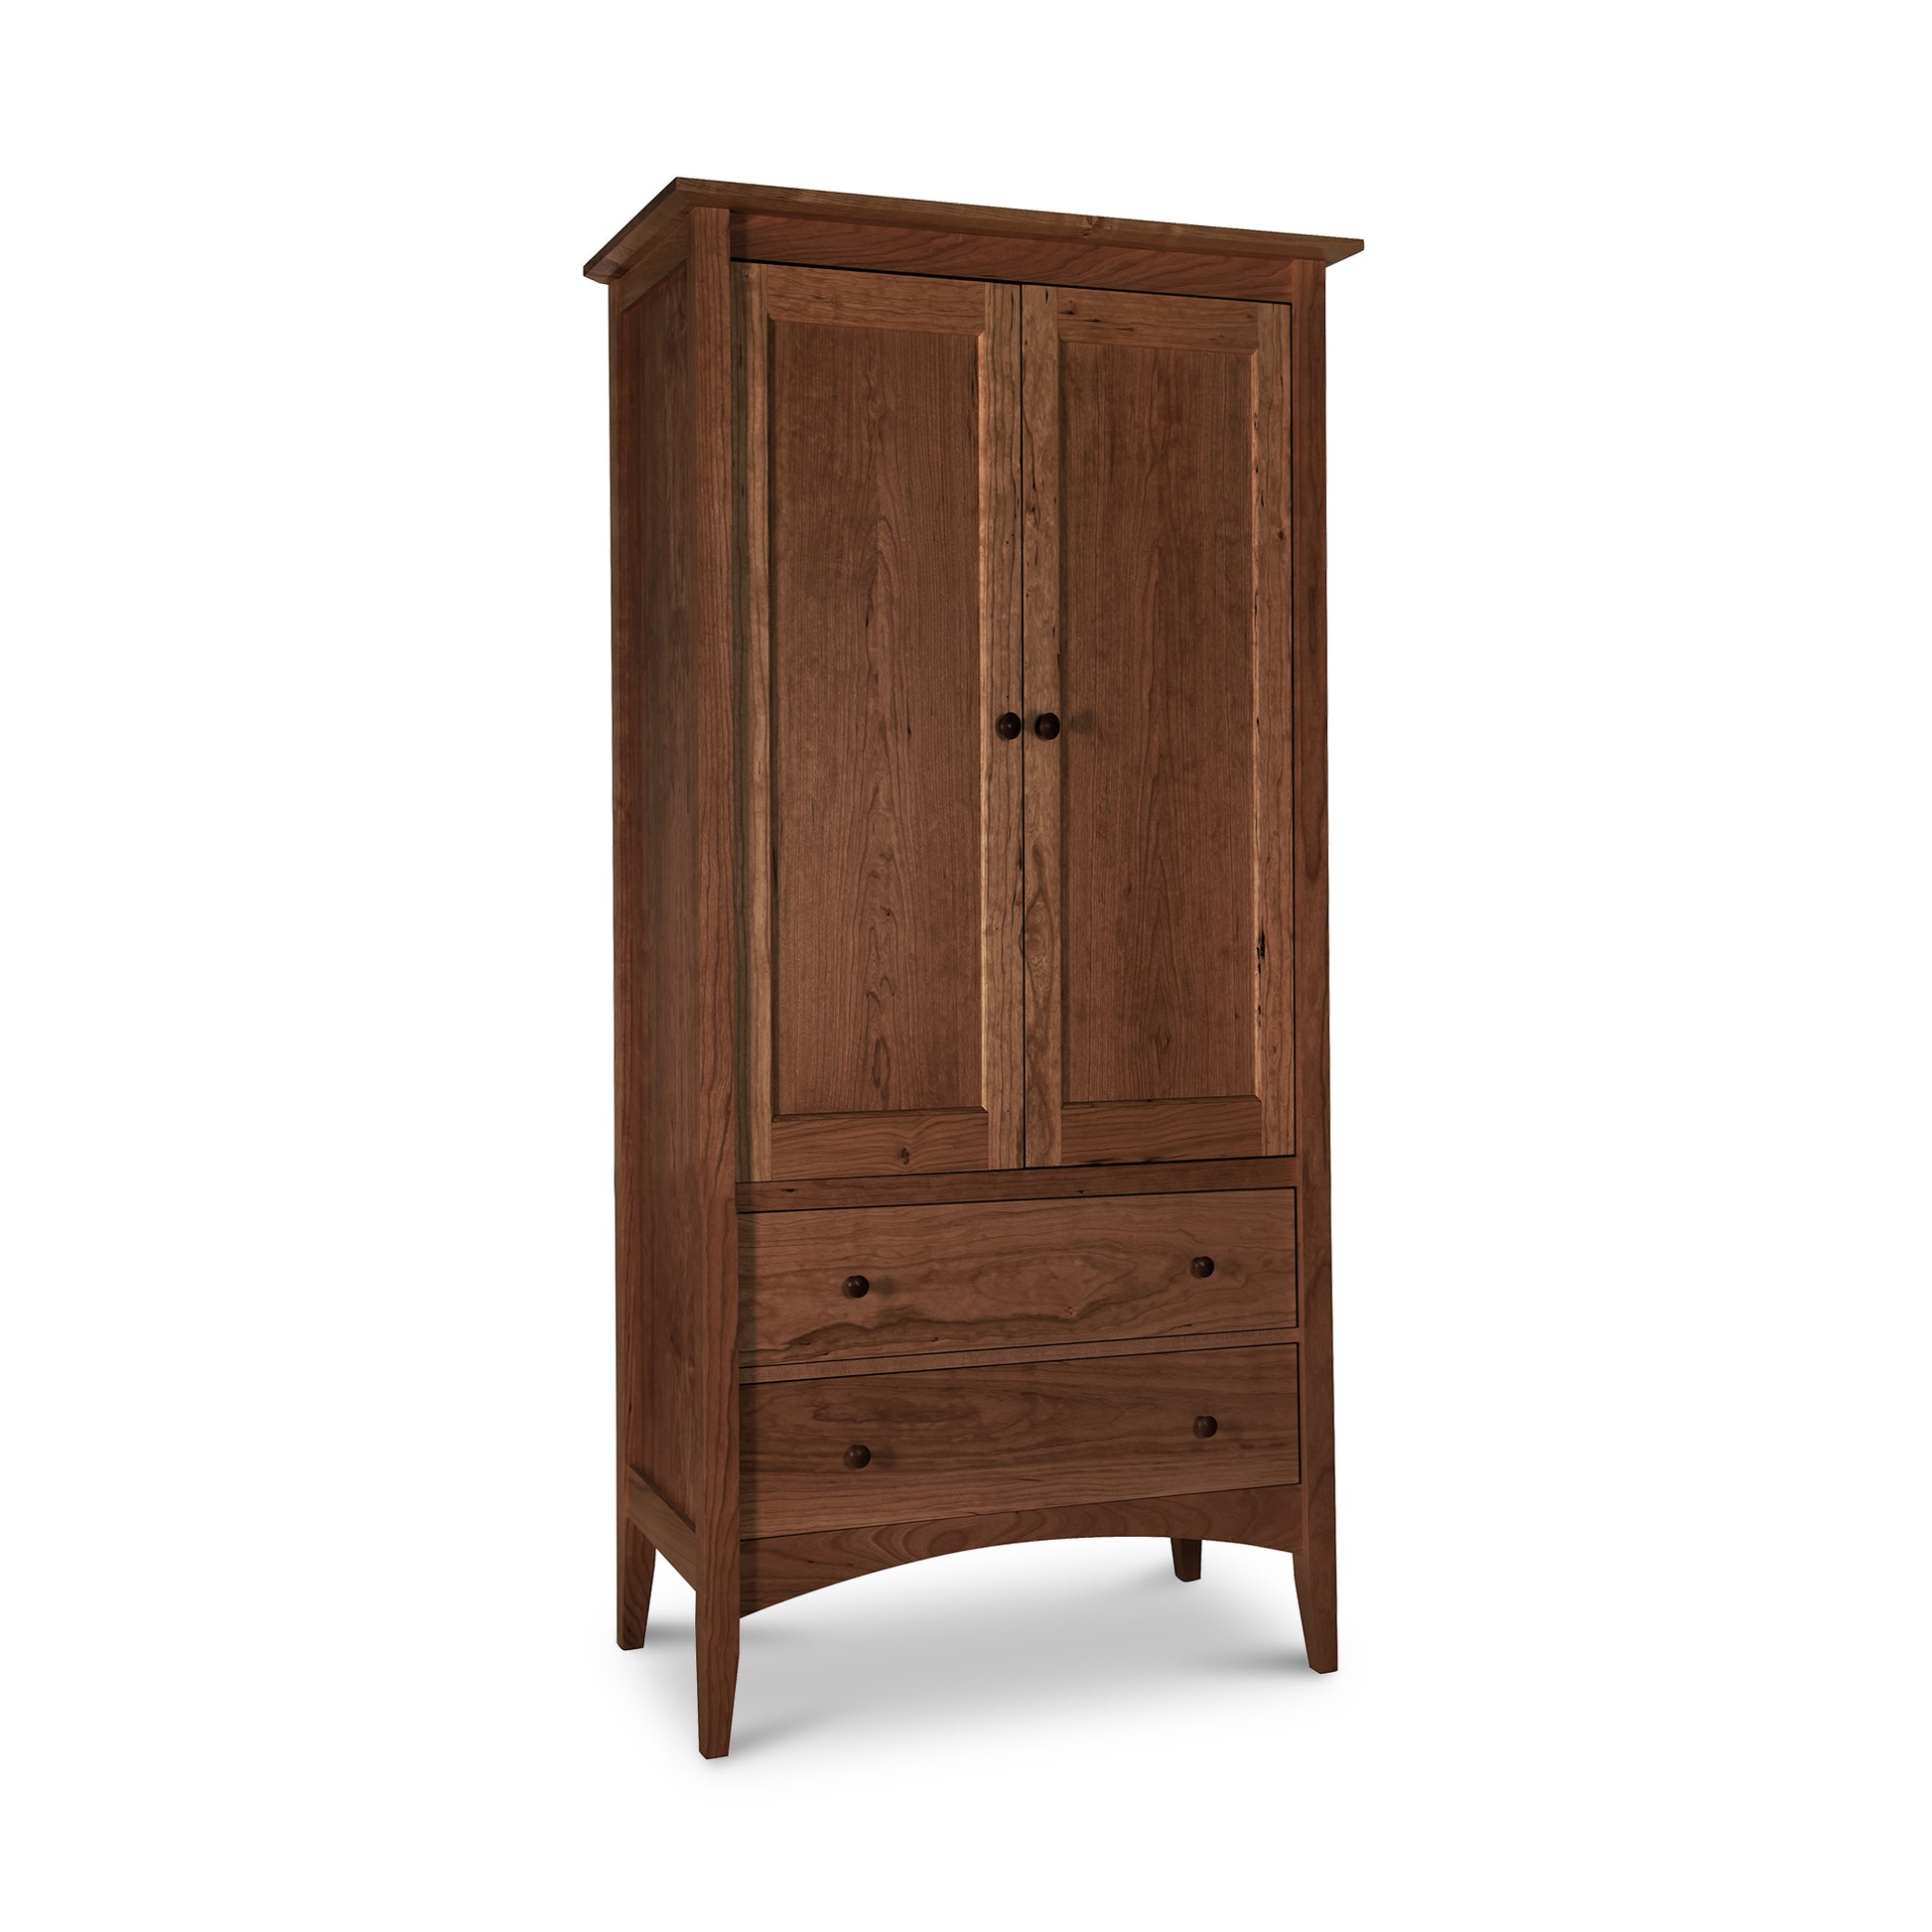 A Maple Corner Woodworks American Shaker Armoire with two drawers and two doors, proudly American made.